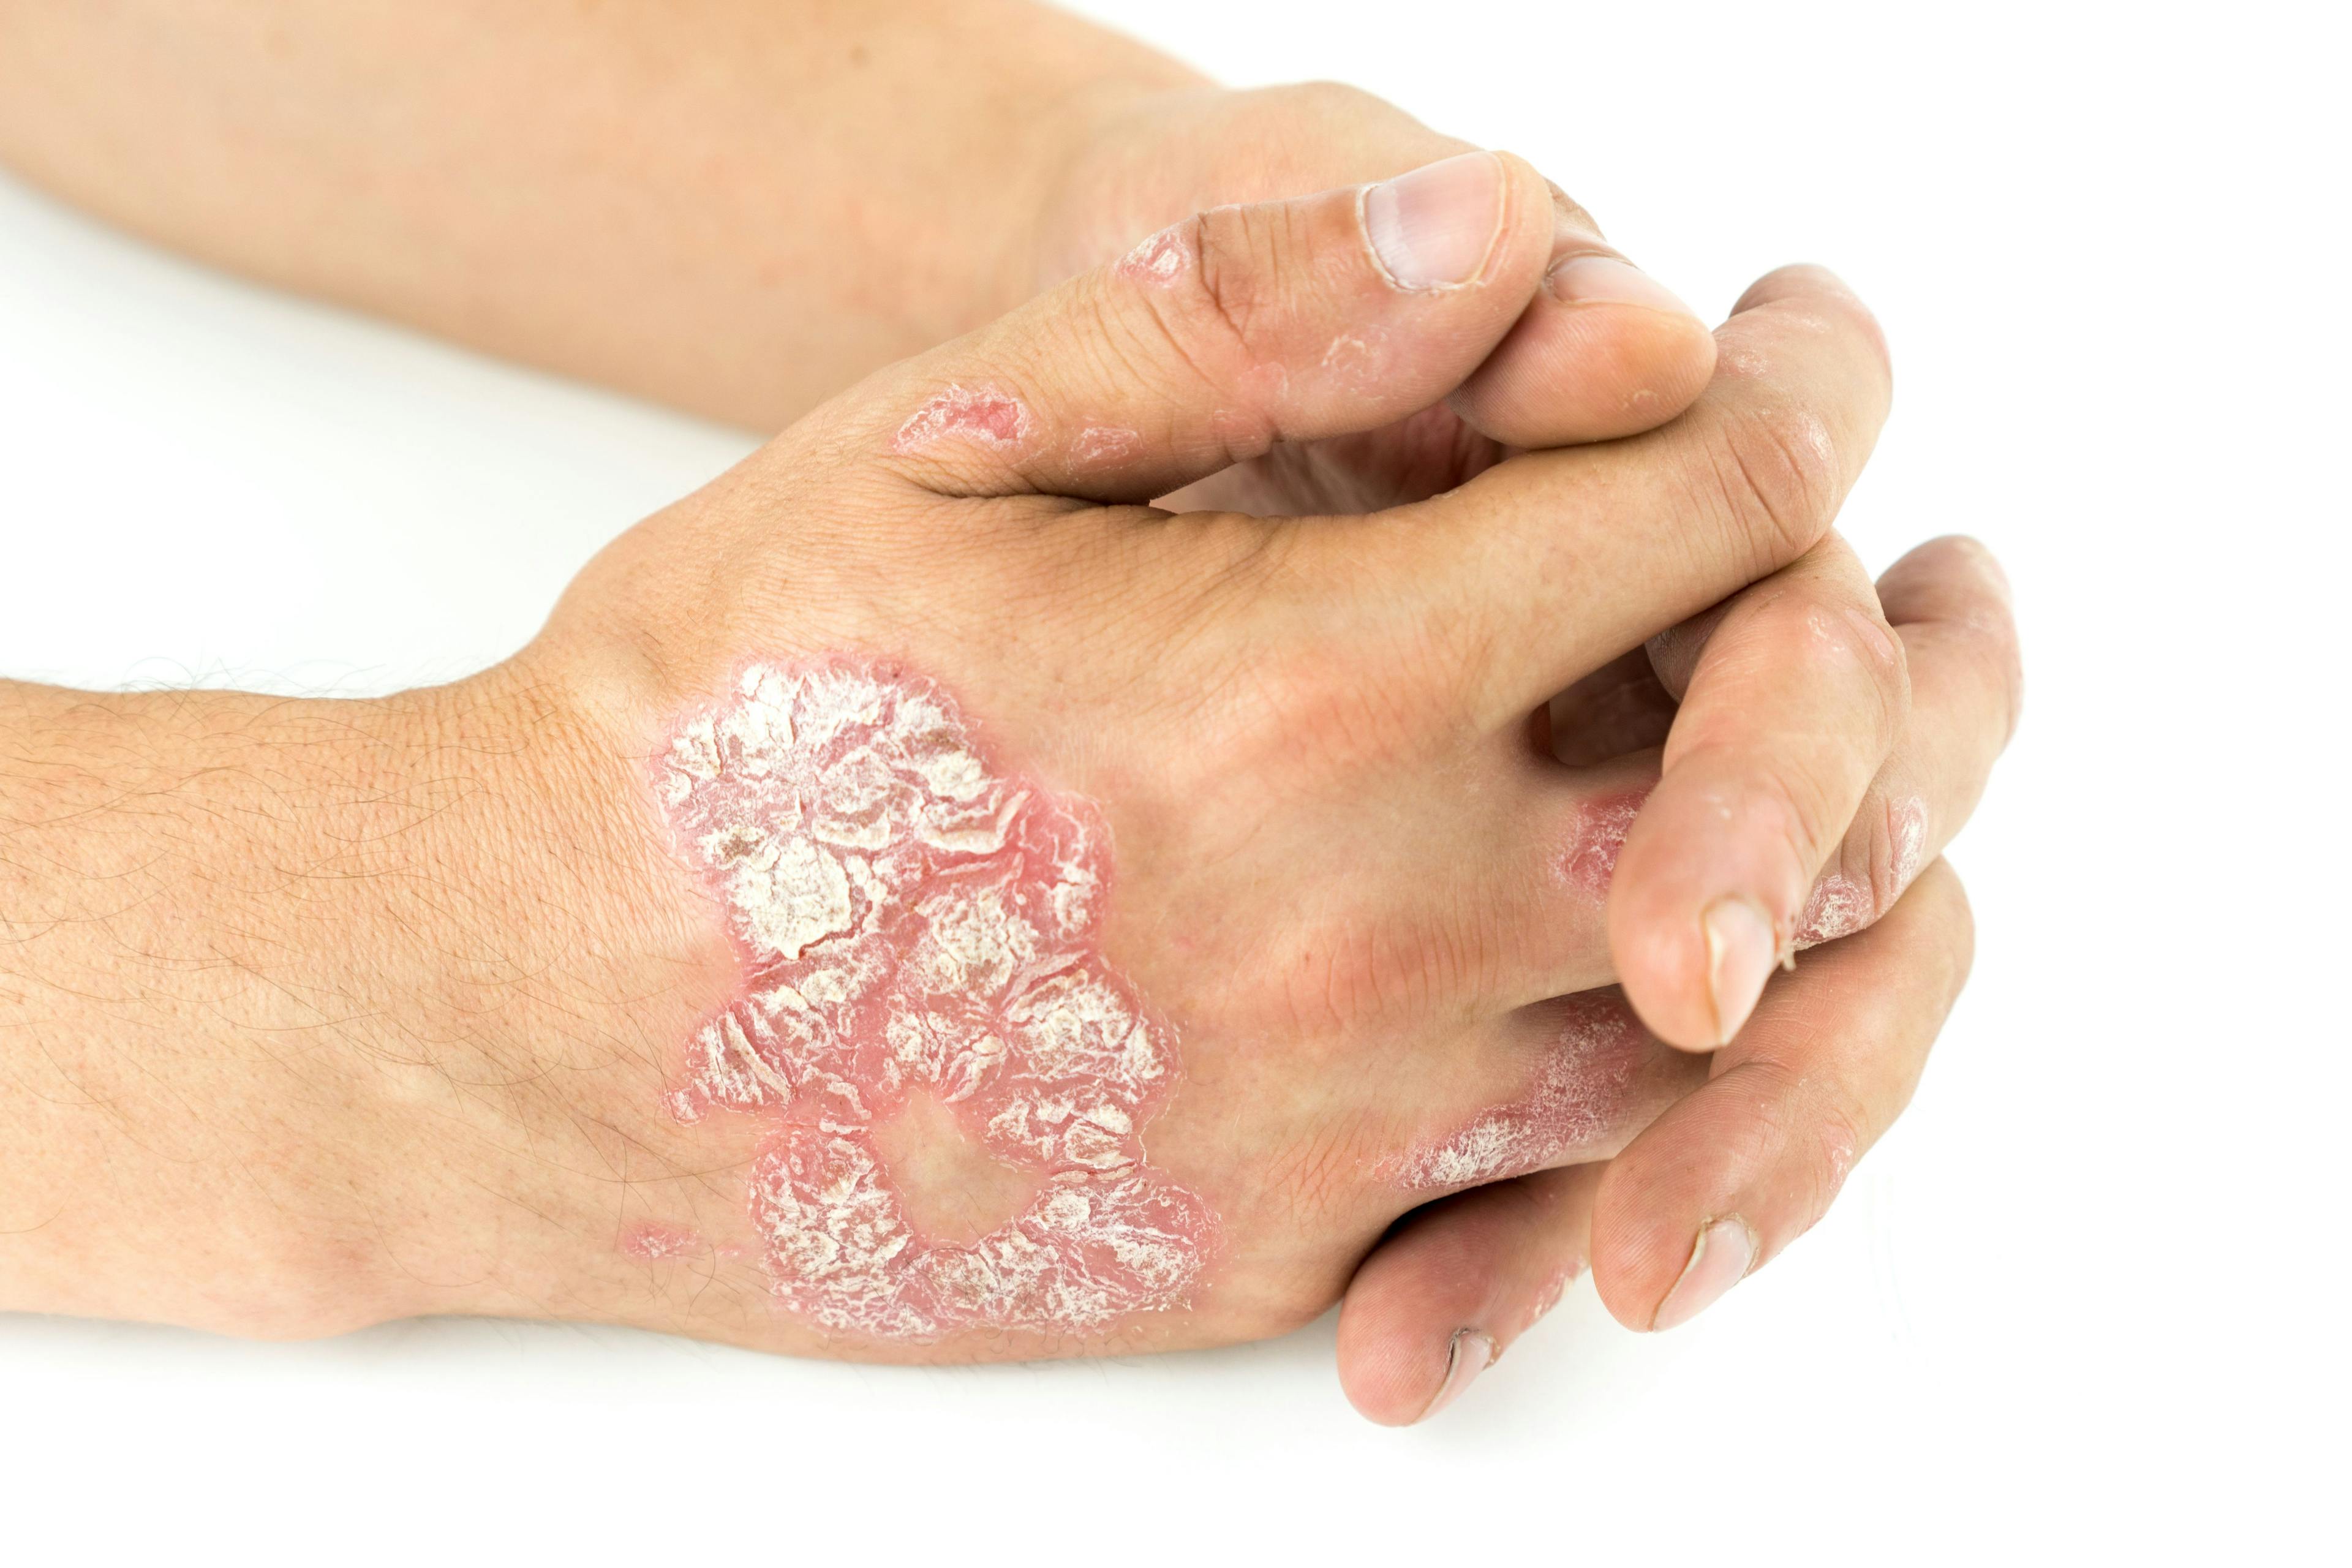 Psoriasis vulgaris on the male hands with plaque, rash and patches, isolated on white background. Autoimmune genetic disease | Image credit: Ban - stock.adobe.com